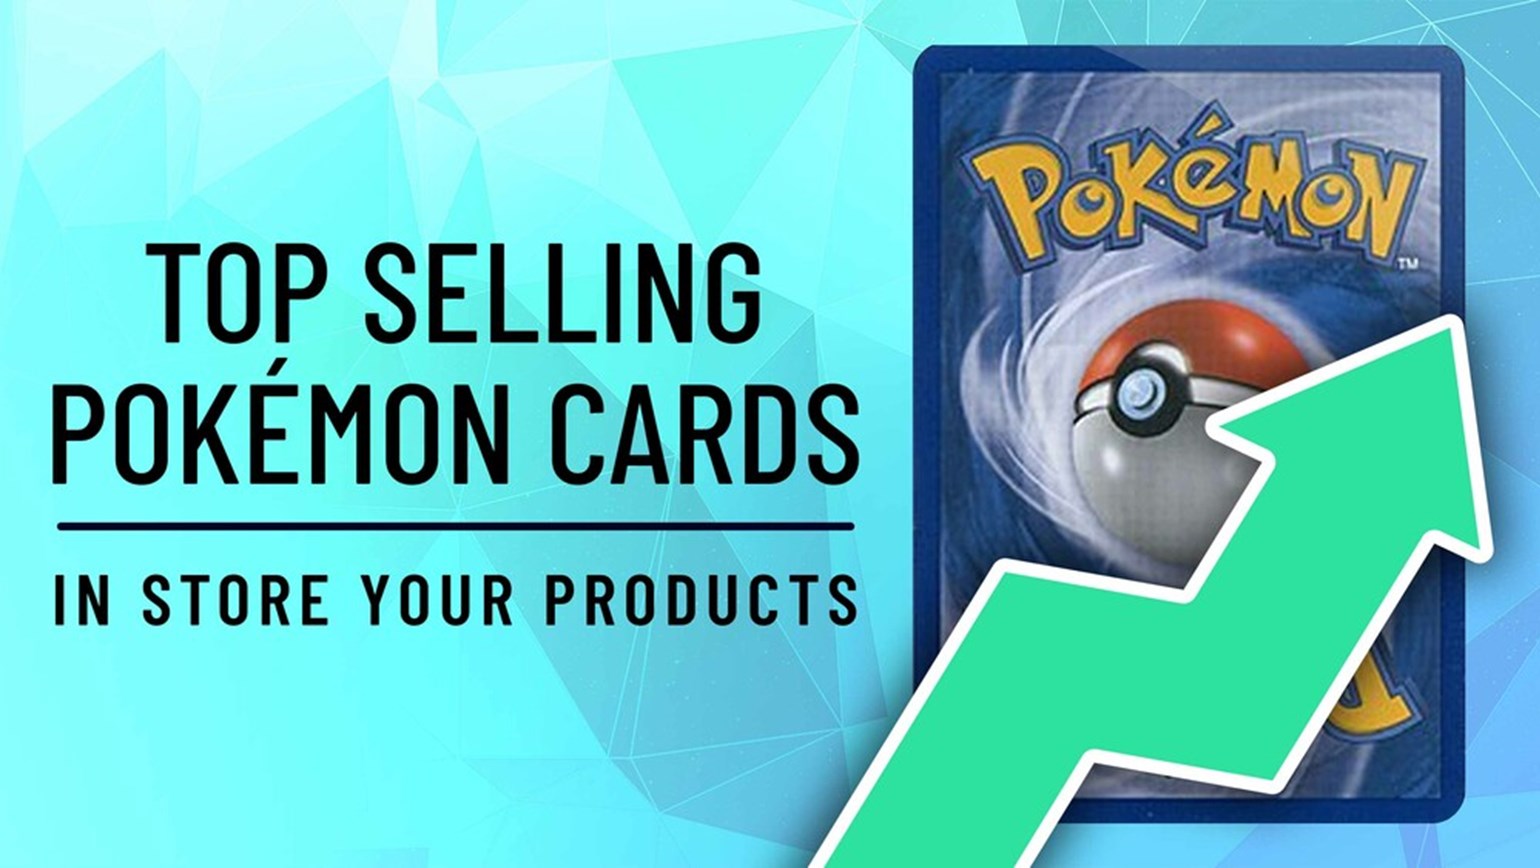 February Top Selling Pokémon Cards in SYP Under $25